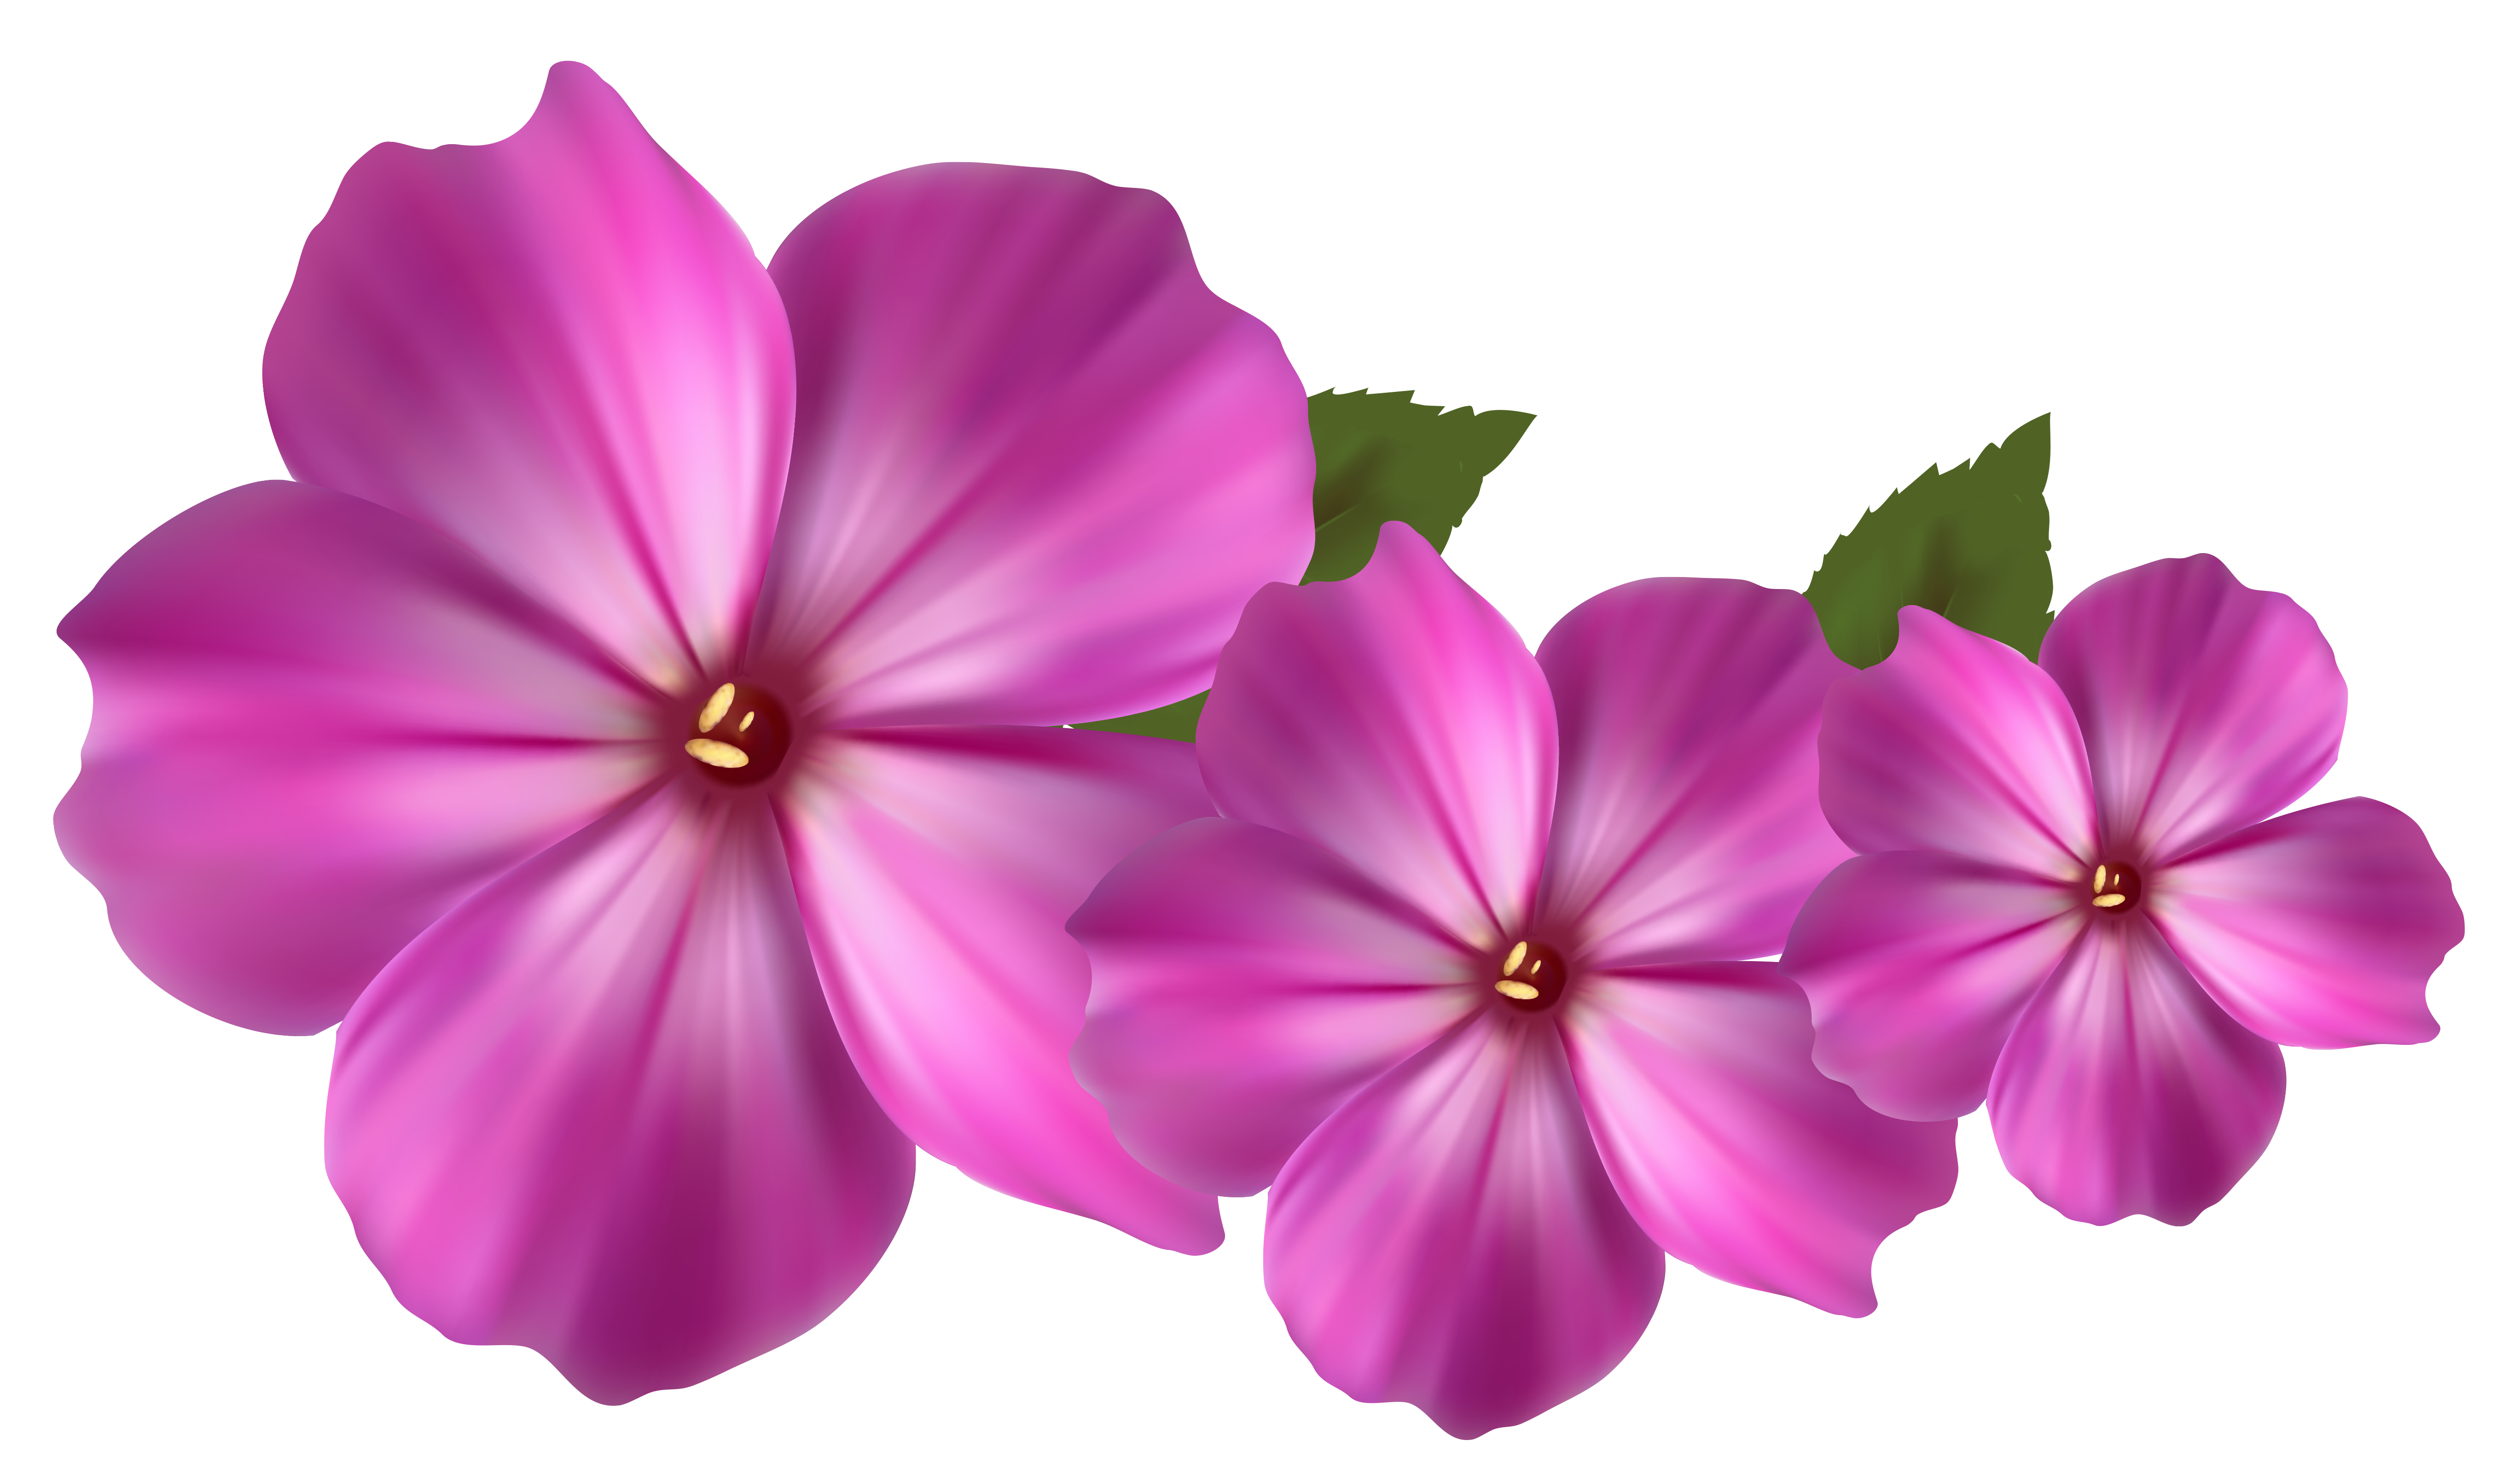 28 Flower Png   Free Cliparts That You Can Download To You Computer